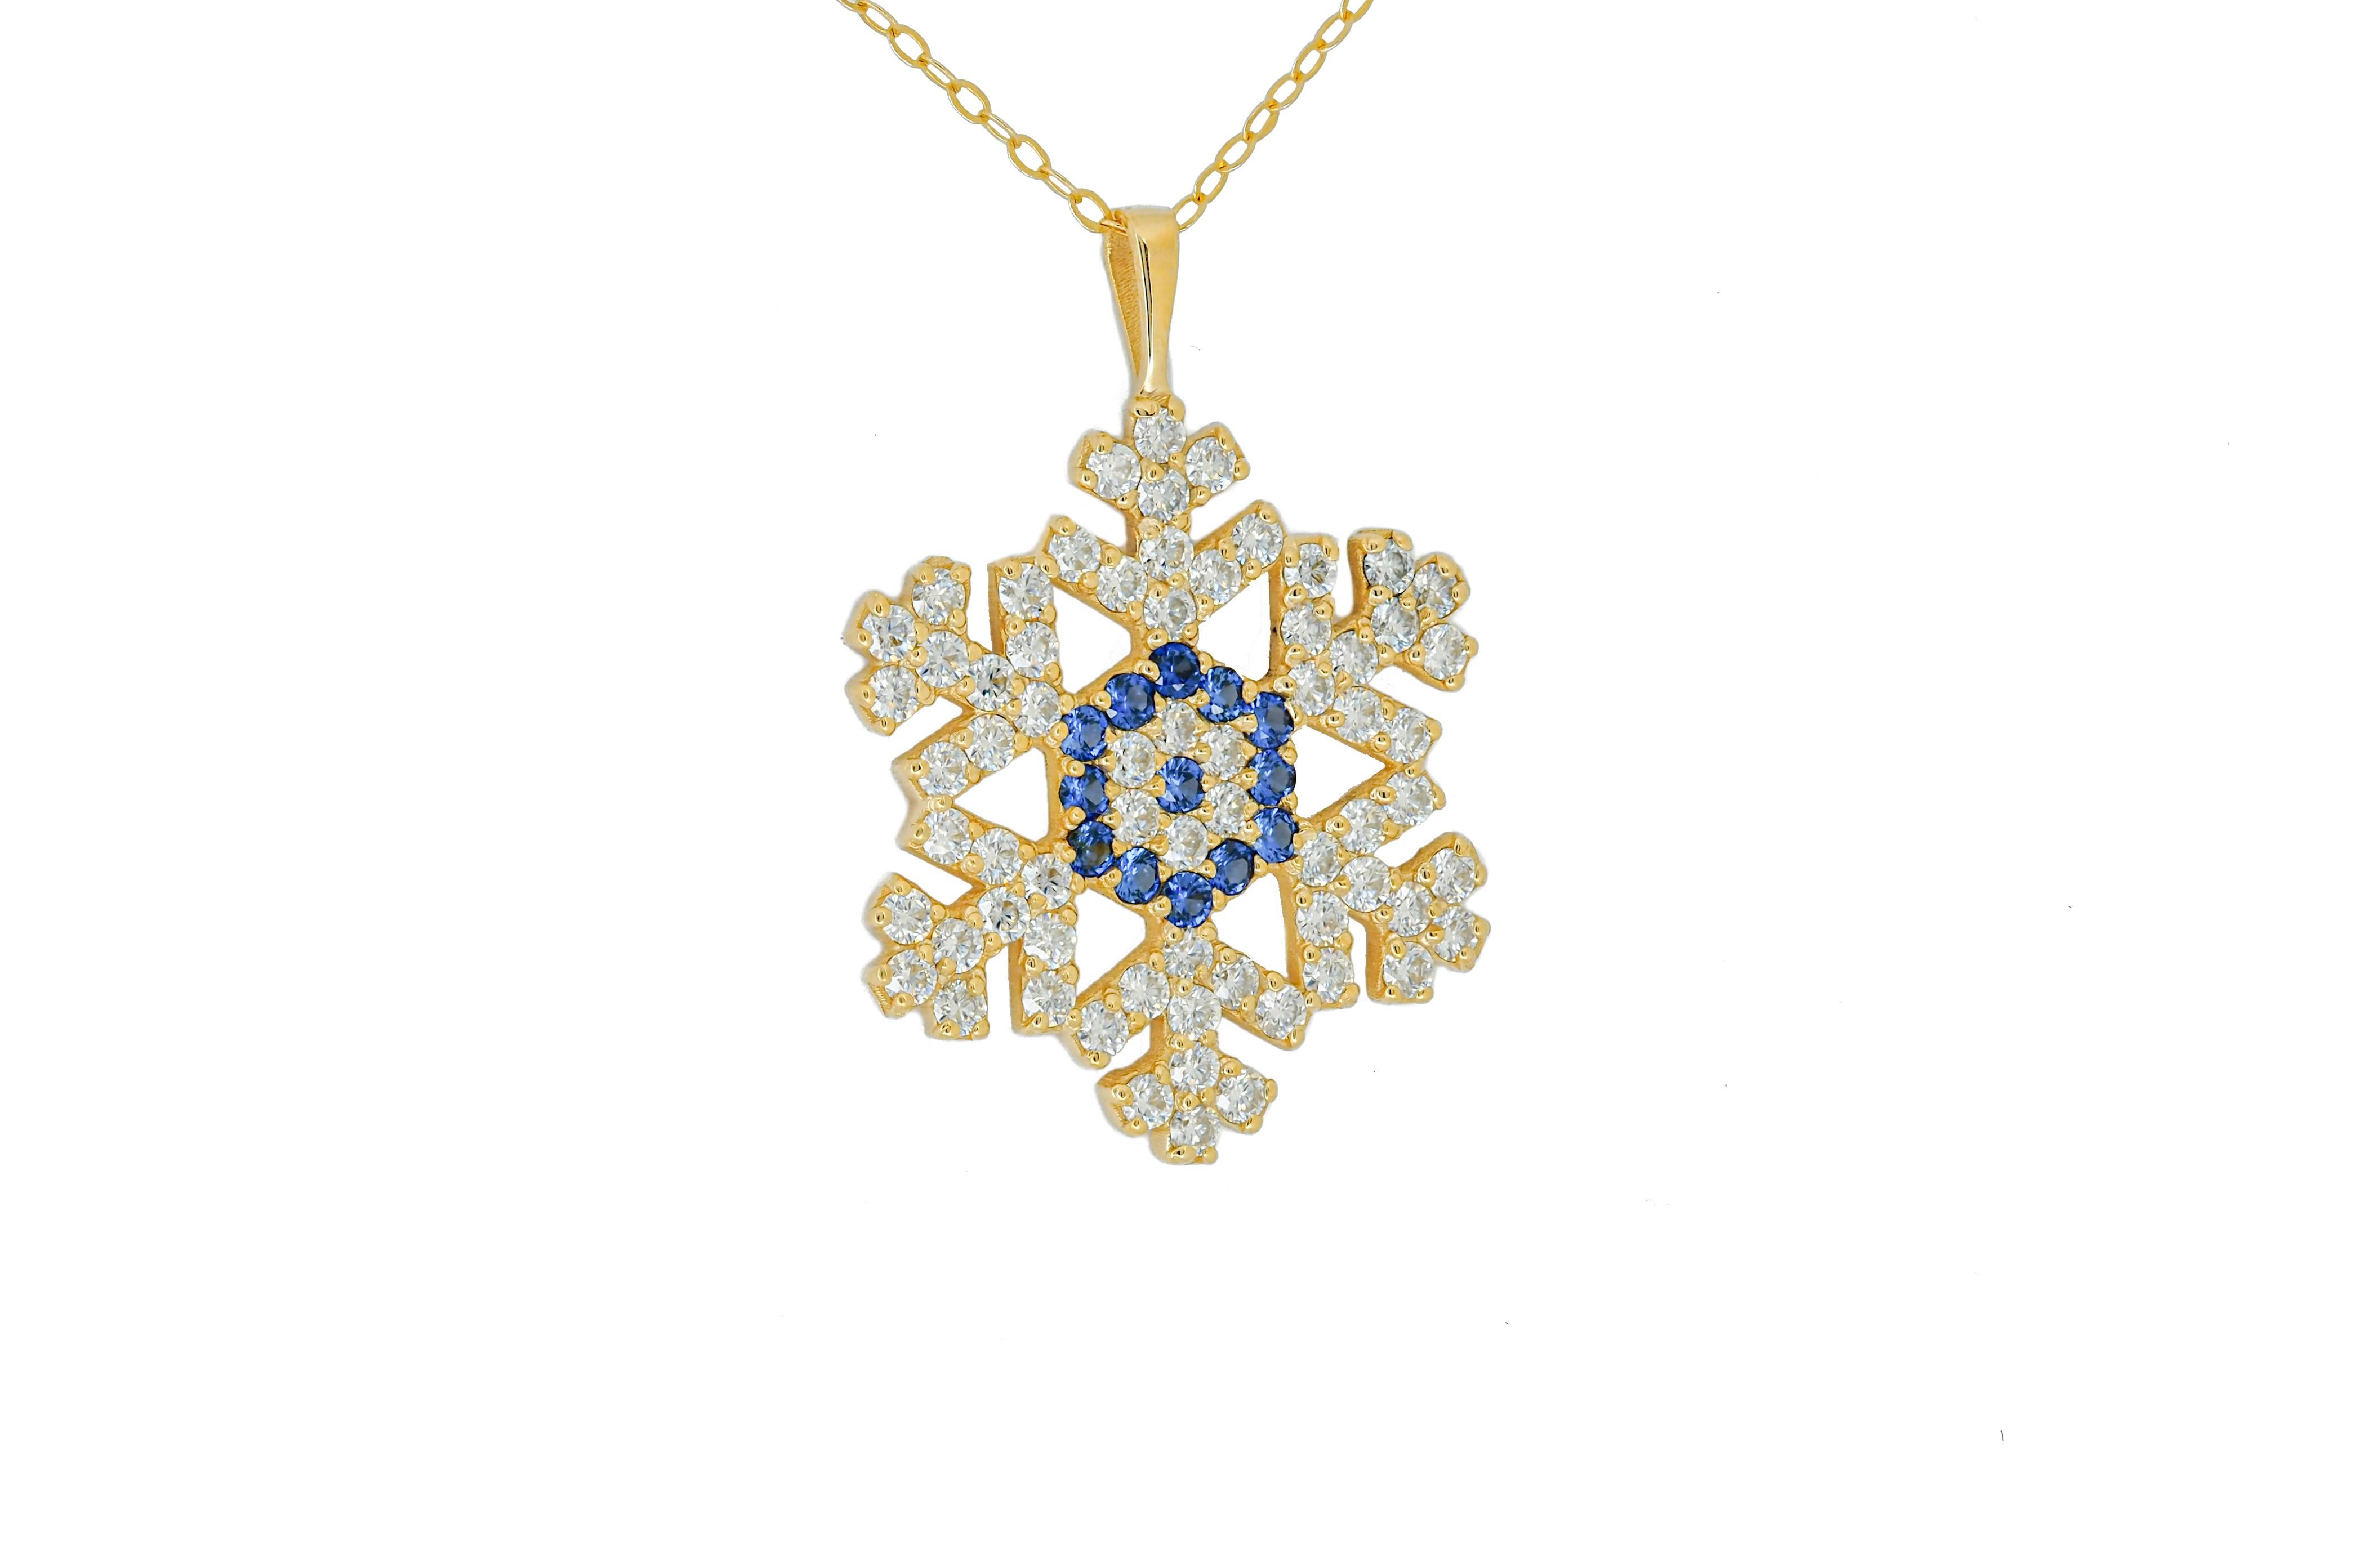 Women's Snowflake charm necklace in 14k solid gold. Gold Snowflake Pendant.